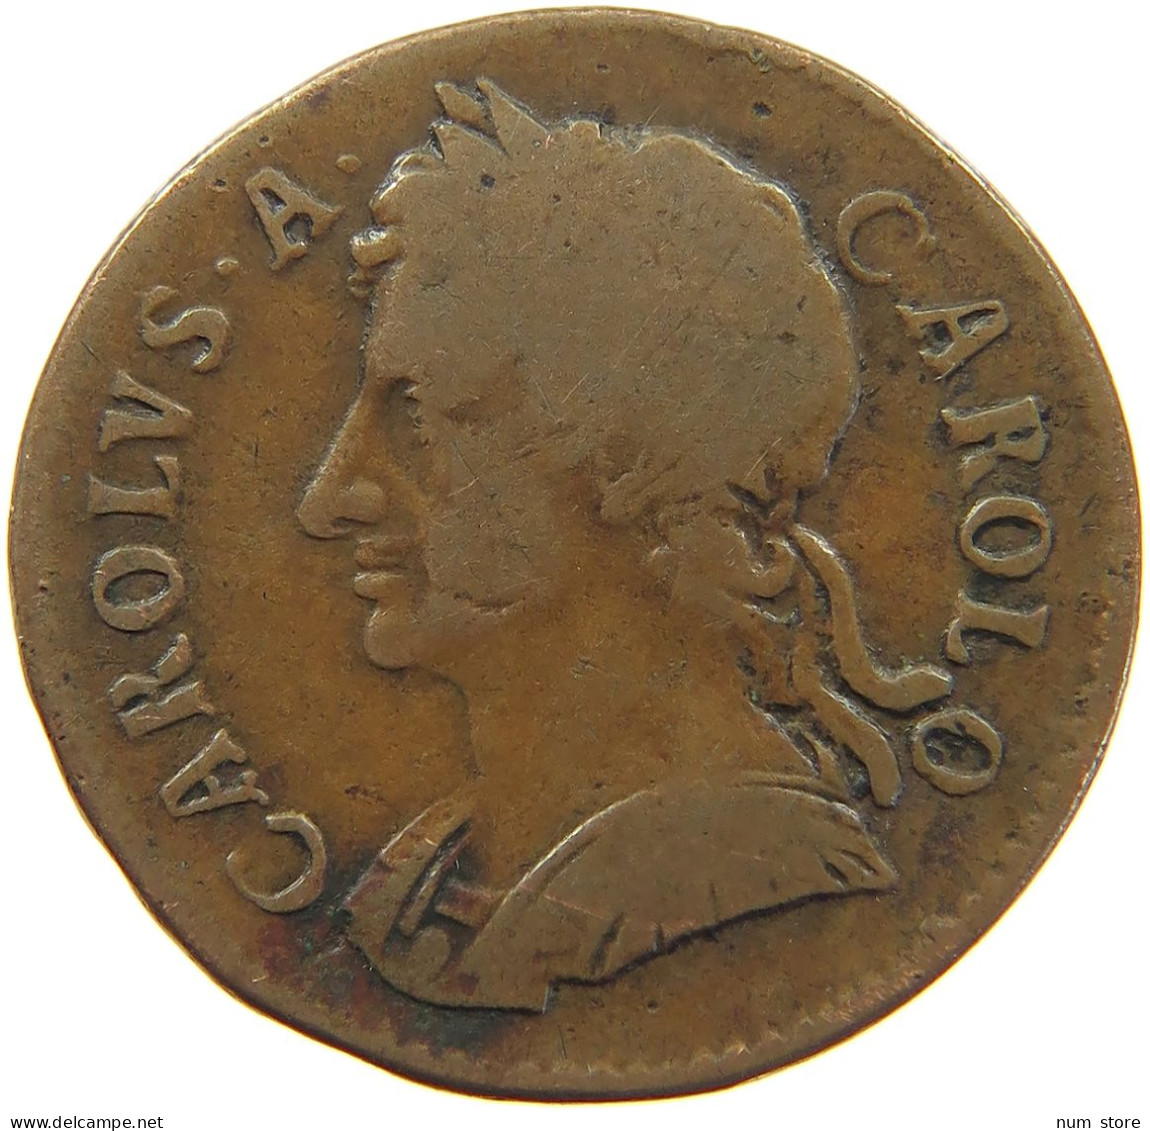 GREAT BRITAIN FARTHING 1675 CHARLES II. (1660-1685) #MA 103848 - A. 1 Farthing